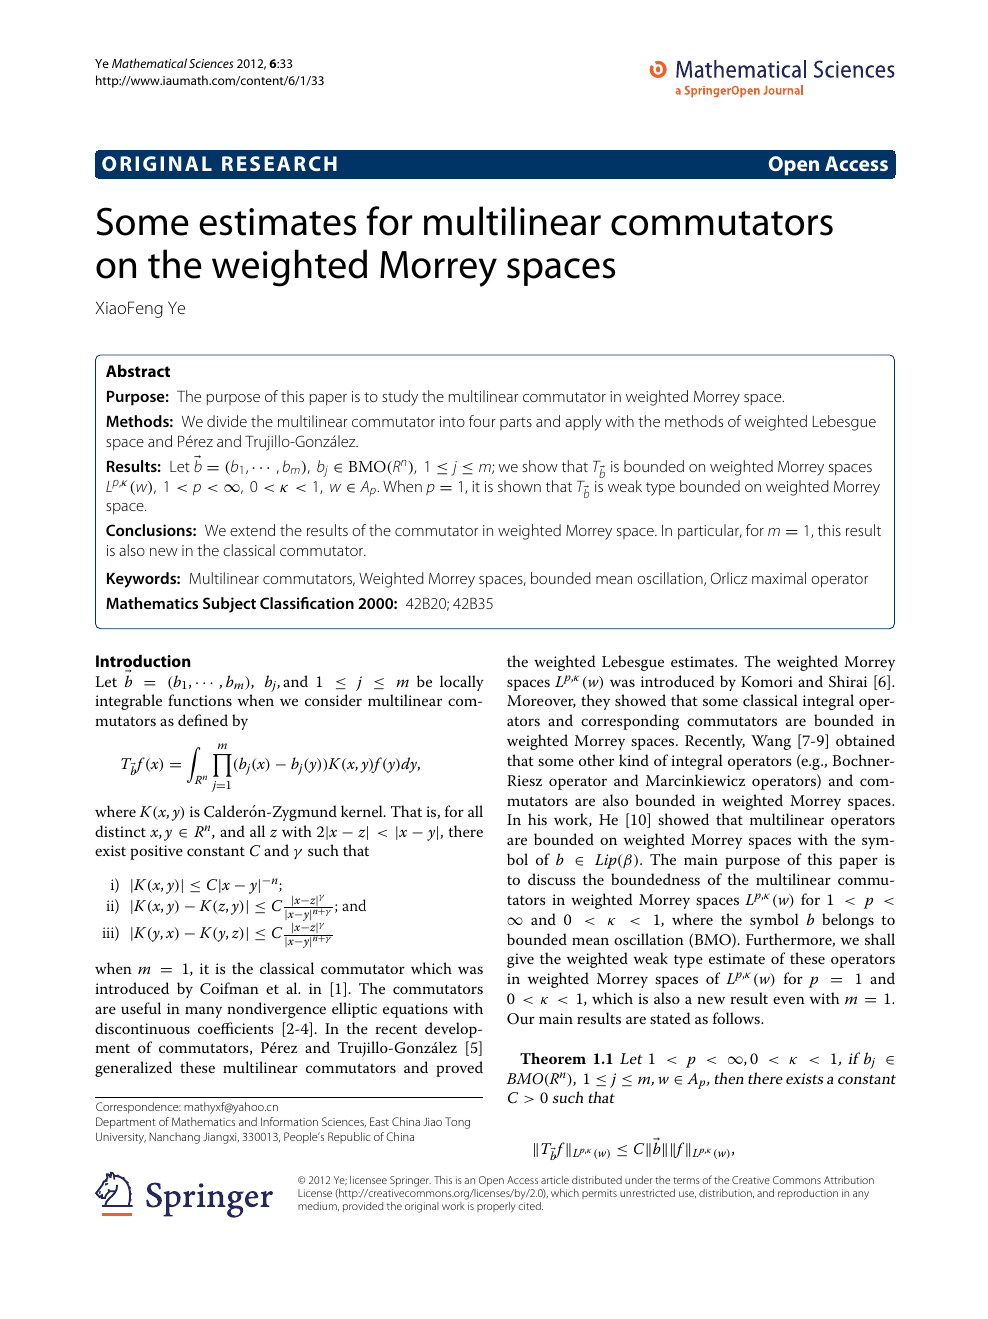 Some Estimates For Multilinear Commutators On The Weighted Morrey Spaces Topic Of Research Paper In Mathematics Download Scholarly Article Pdf And Read For Free On Cyberleninka Open Science Hub